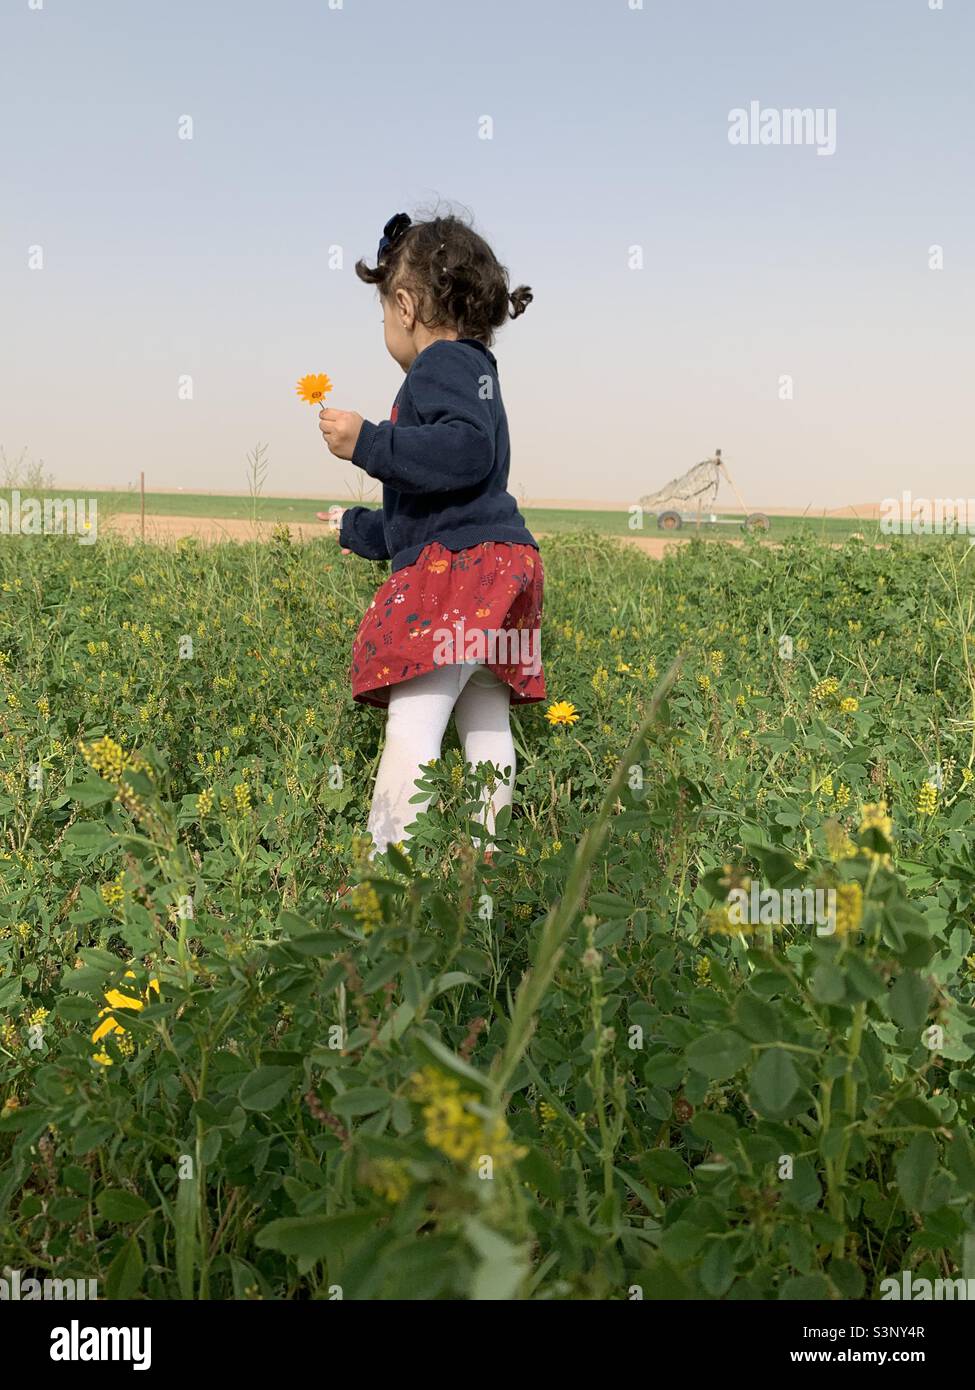 A baby girl playing with flowers Stock Photo